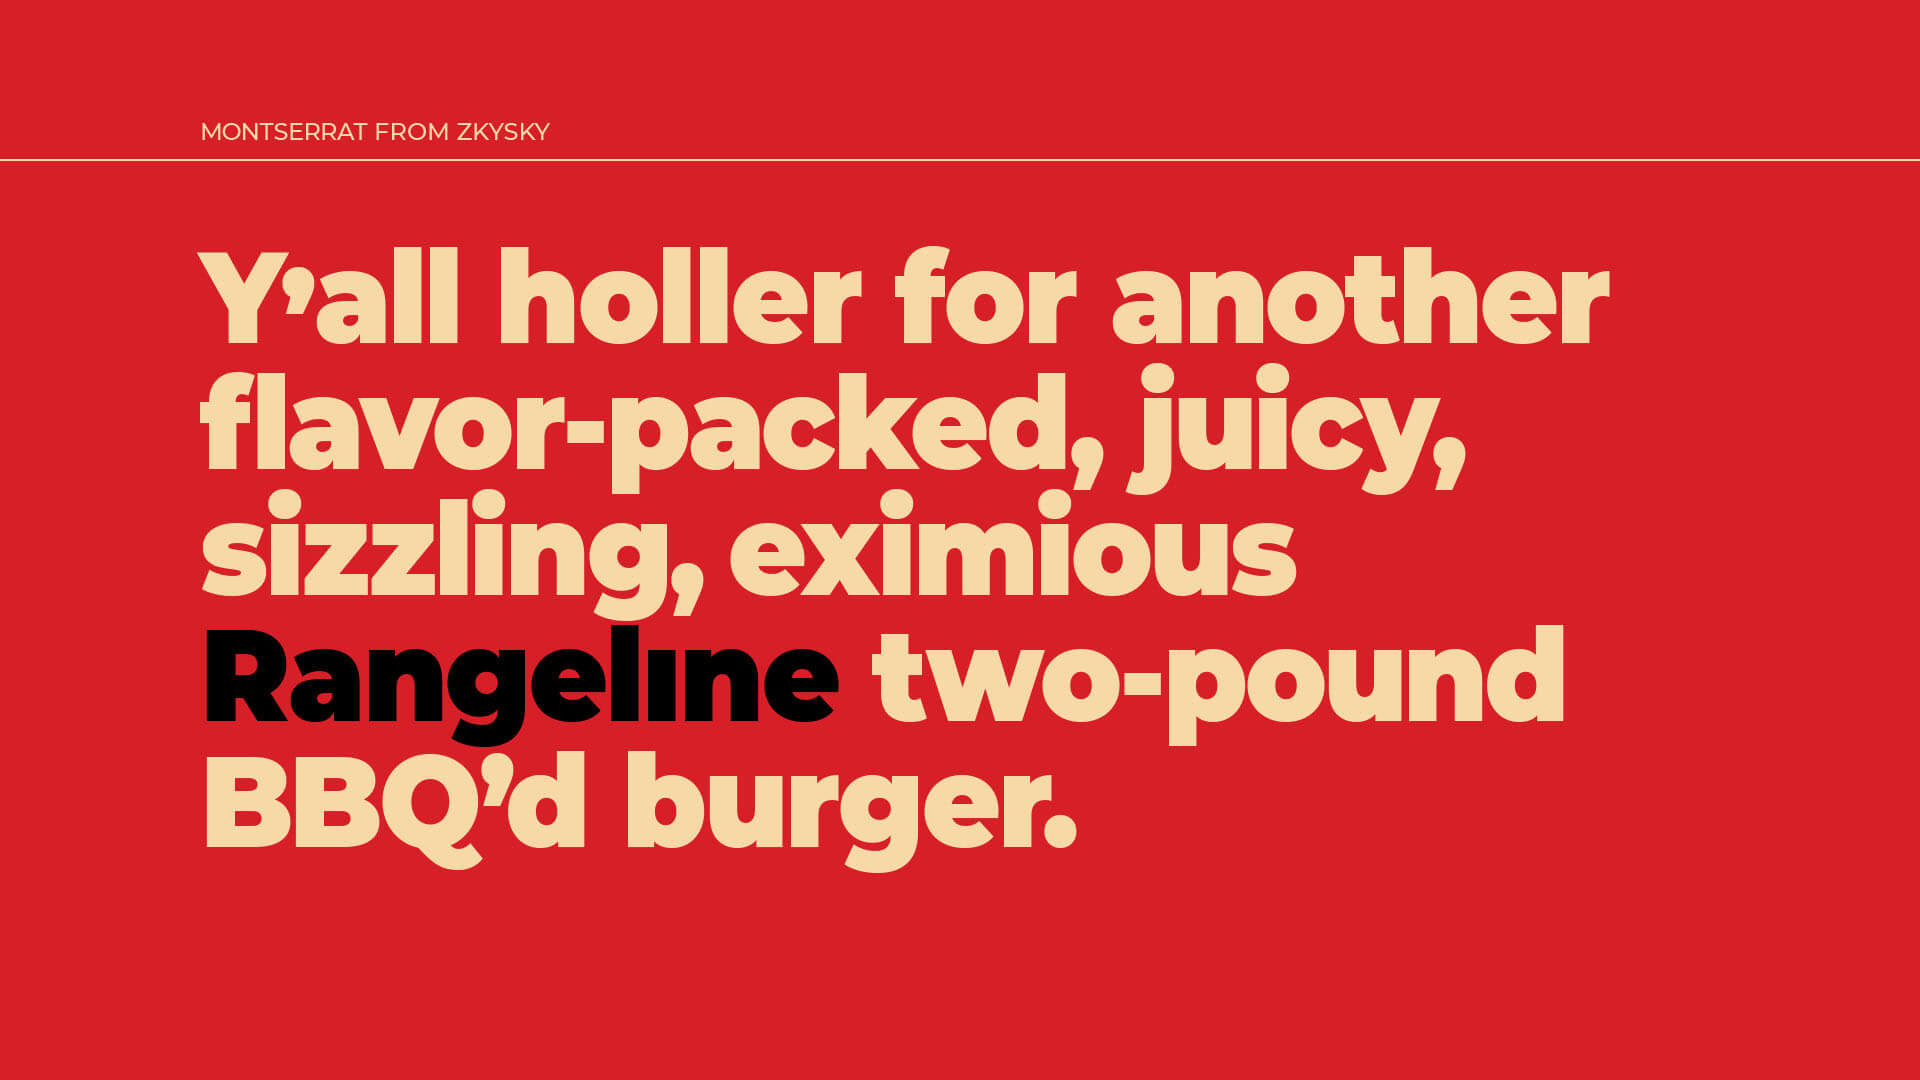 Rangeline Montserrat Type Specimen Pangram: Y’all holler for another flavor-packed, juicy, sizzling, eximious Rangelıne two-pound BBQ’d burger.